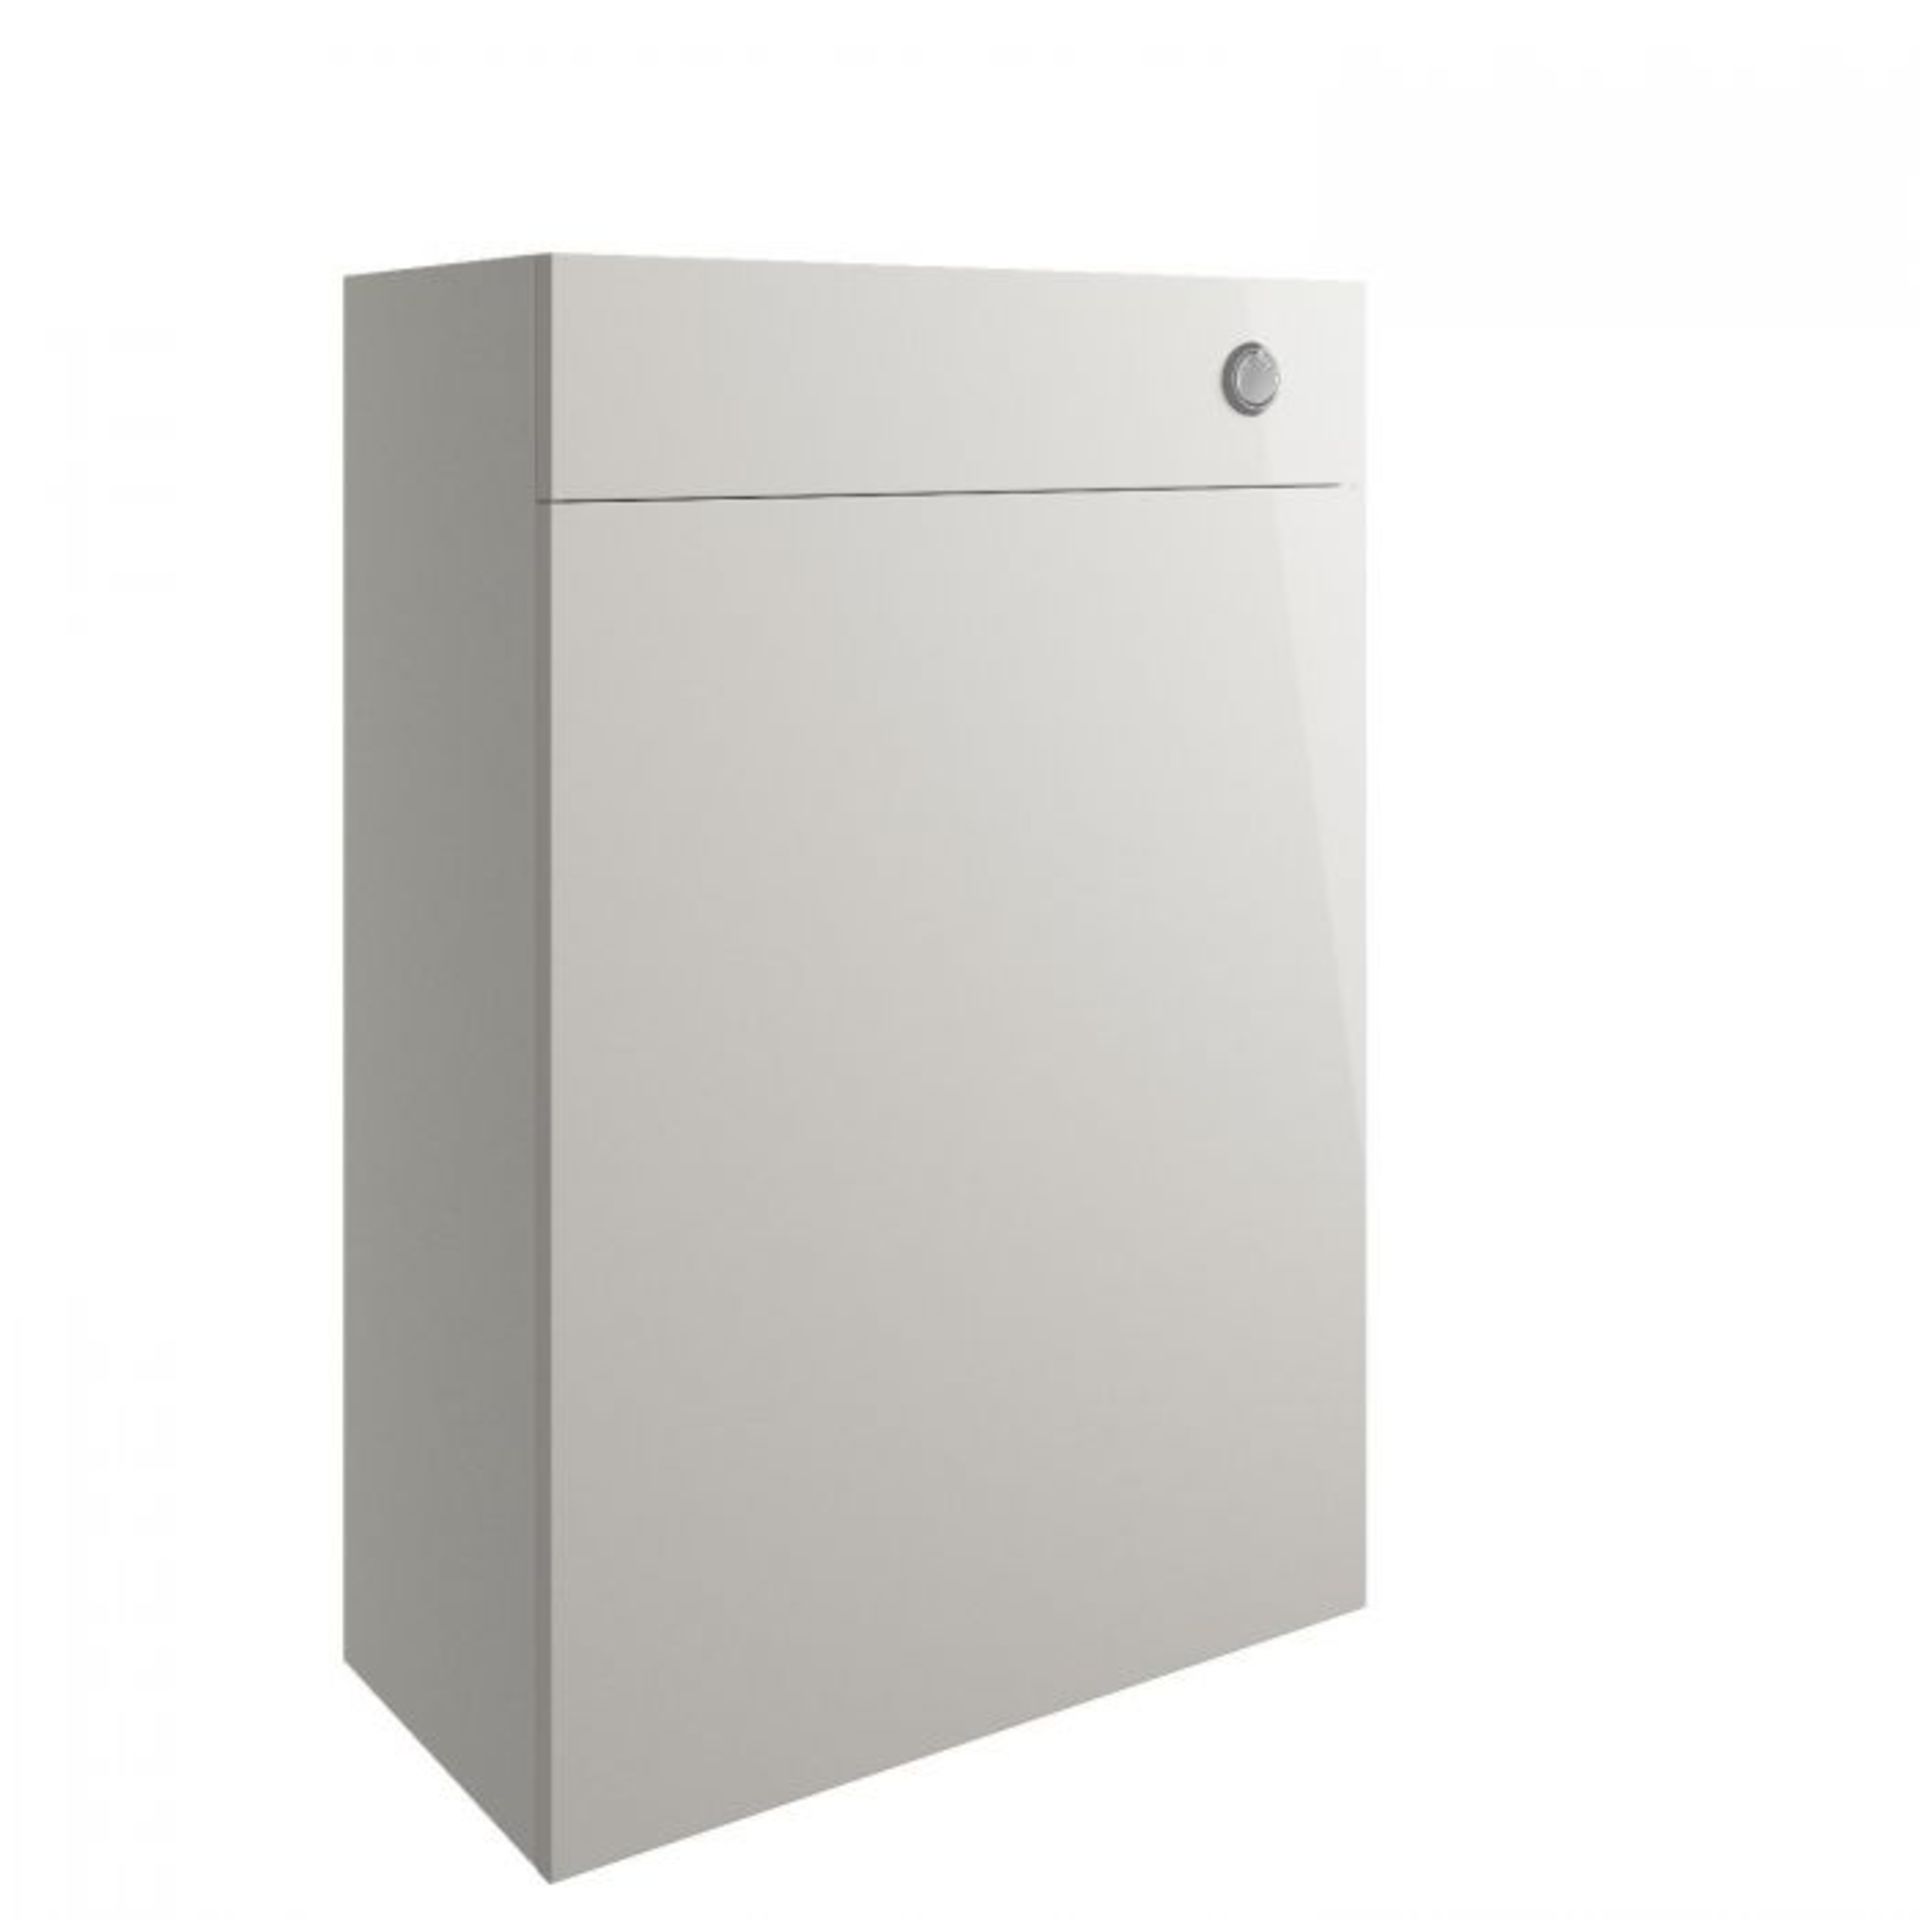 New (NY100) Valesso 600mm WC Toilet Unit - Light Grey. Colour: Pearl Grey Gloss Material: MFC ...